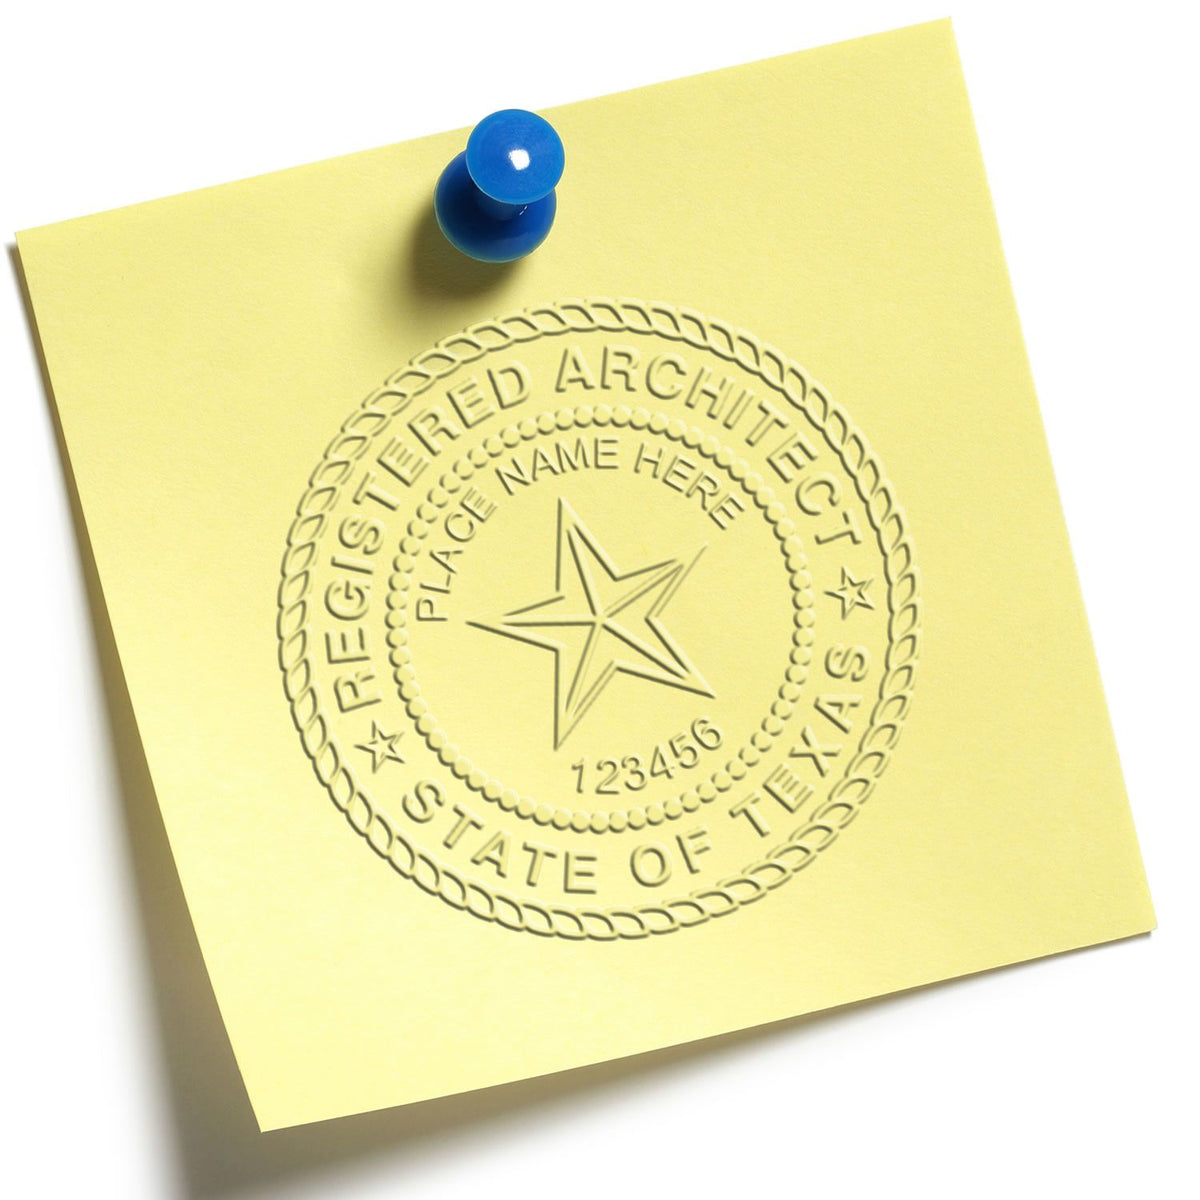 State of Texas Long Reach Architectural Embossing Seal in use photo showing a stamped imprint of the State of Texas Long Reach Architectural Embossing Seal